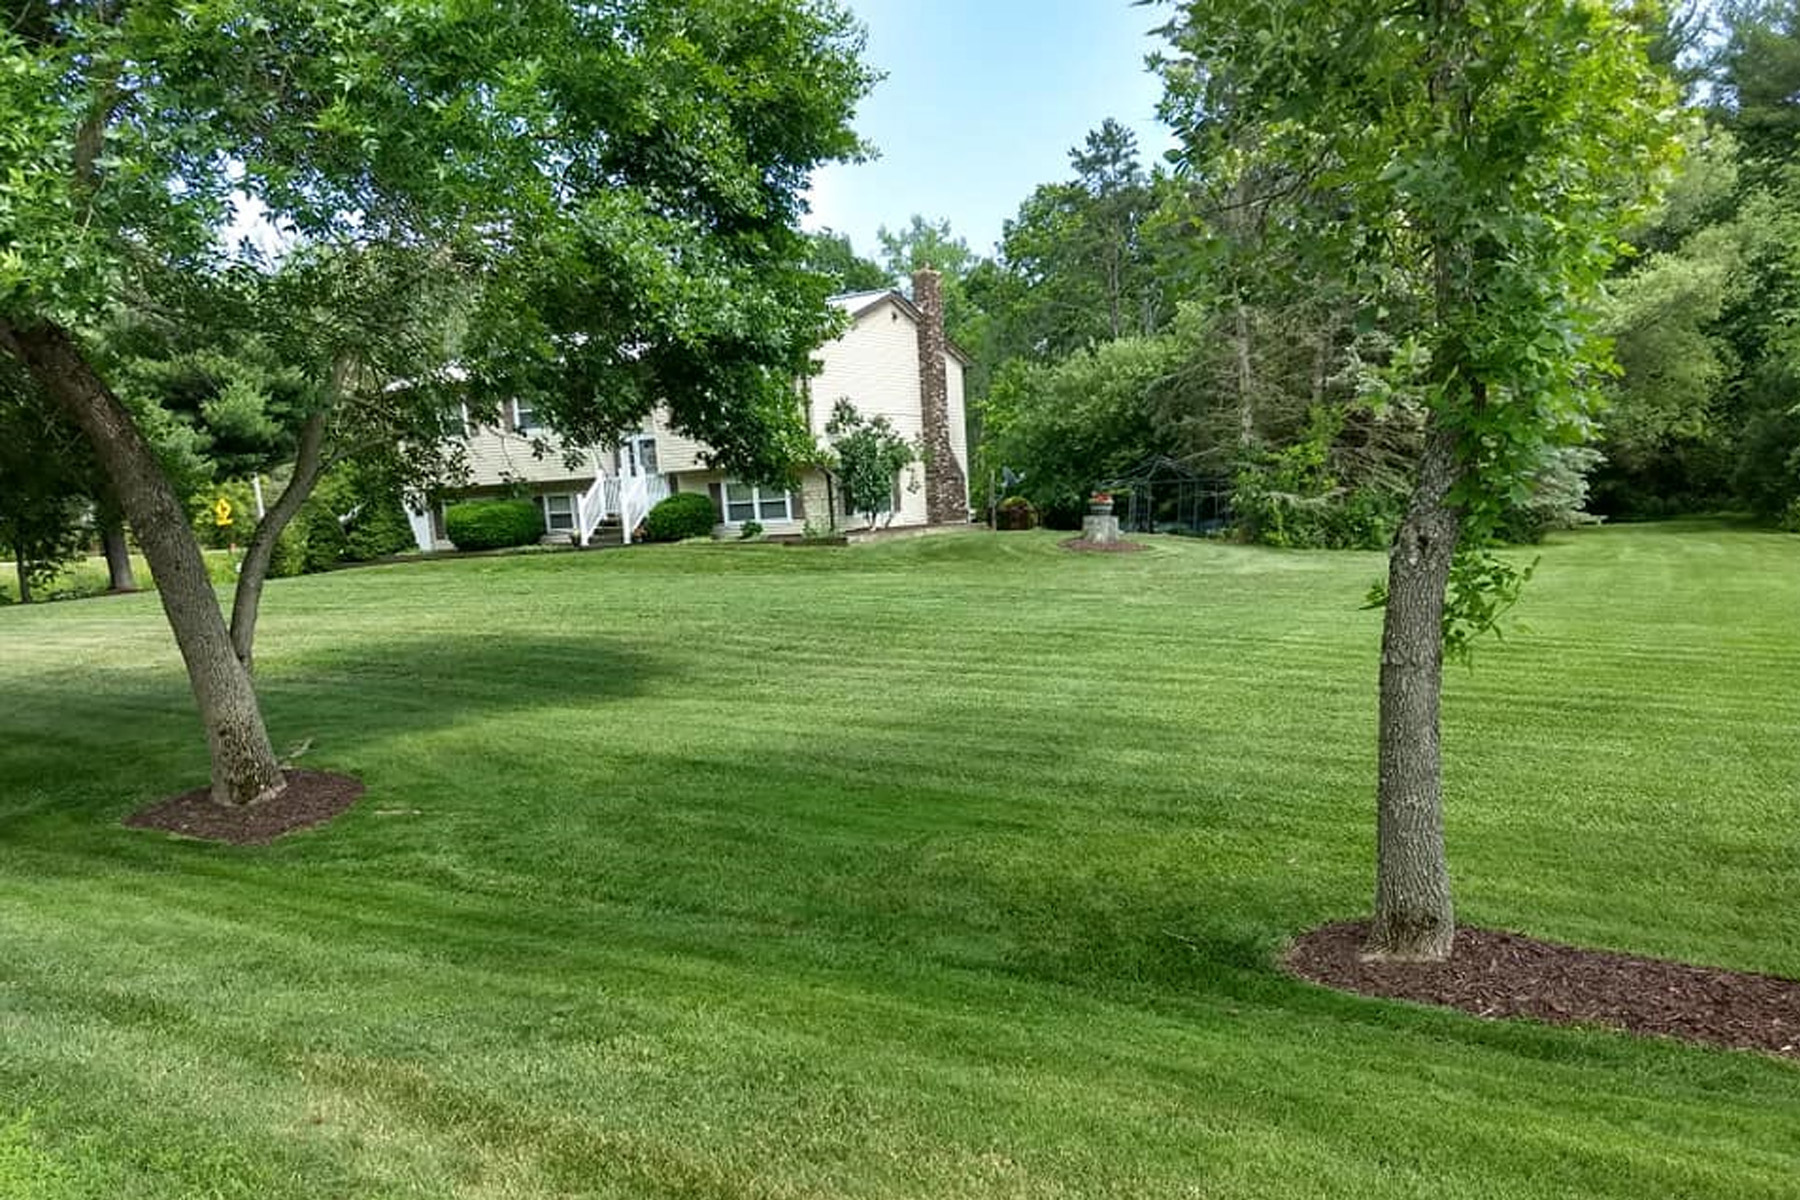 Thumbmnail image of a freshly mowed lawn with three weeded mulch beds around trees